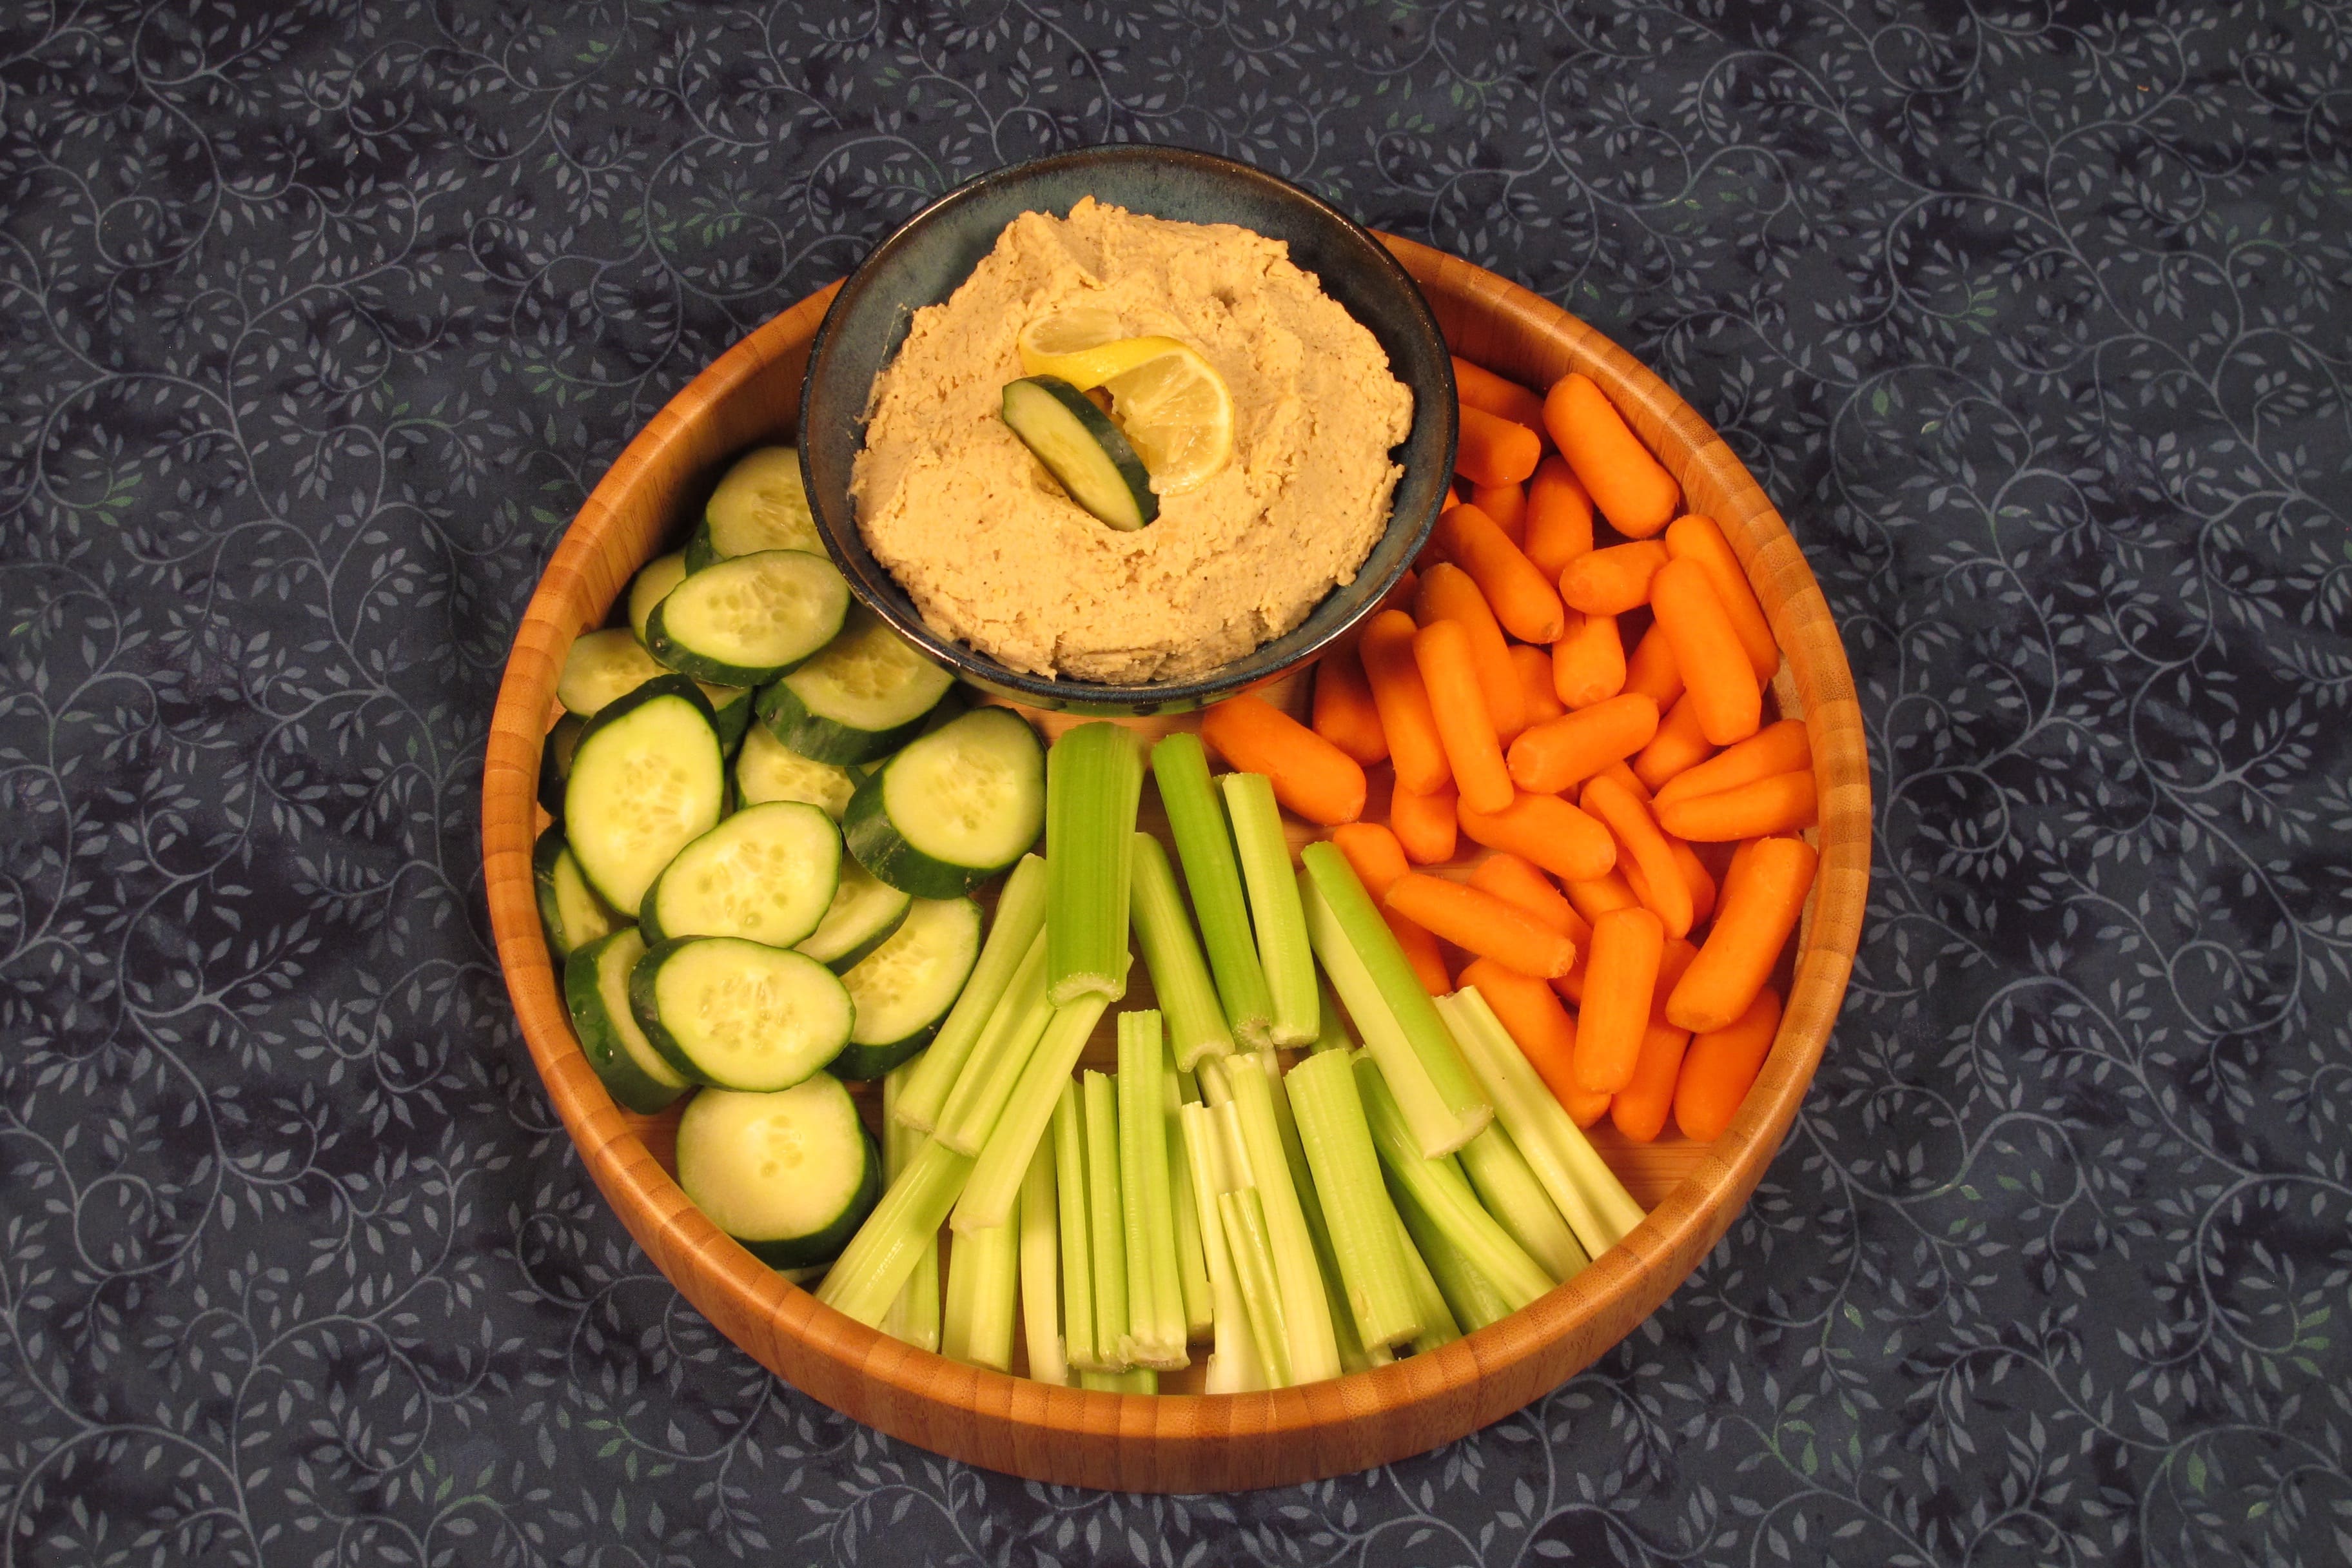 Slice or cut vegetables for dipping.